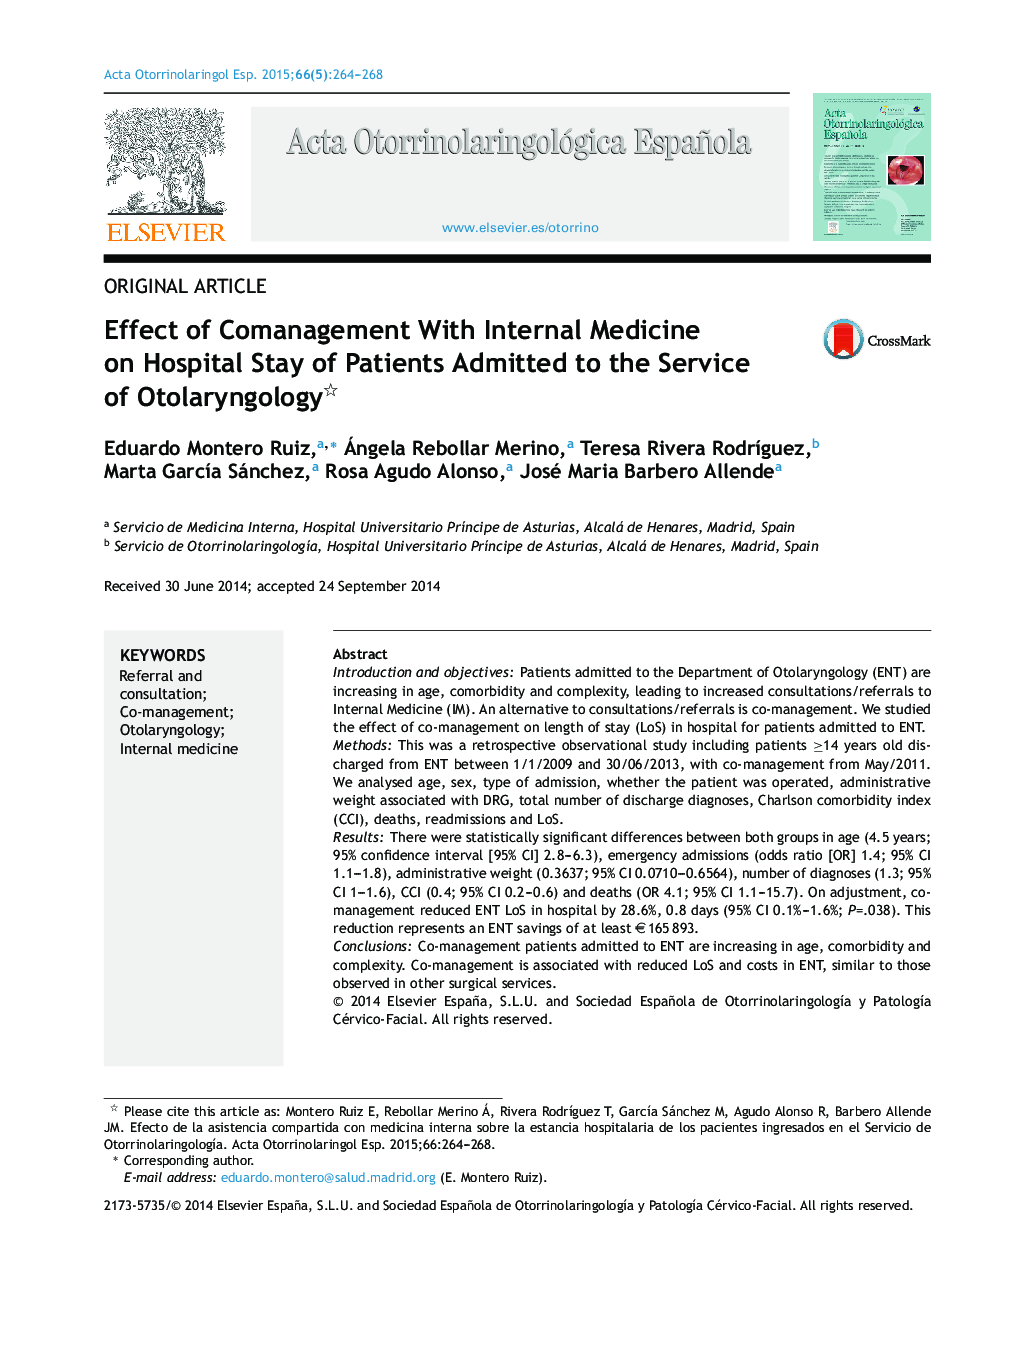 Effect of Comanagement With Internal Medicine on Hospital Stay of Patients Admitted to the Service of Otolaryngology 